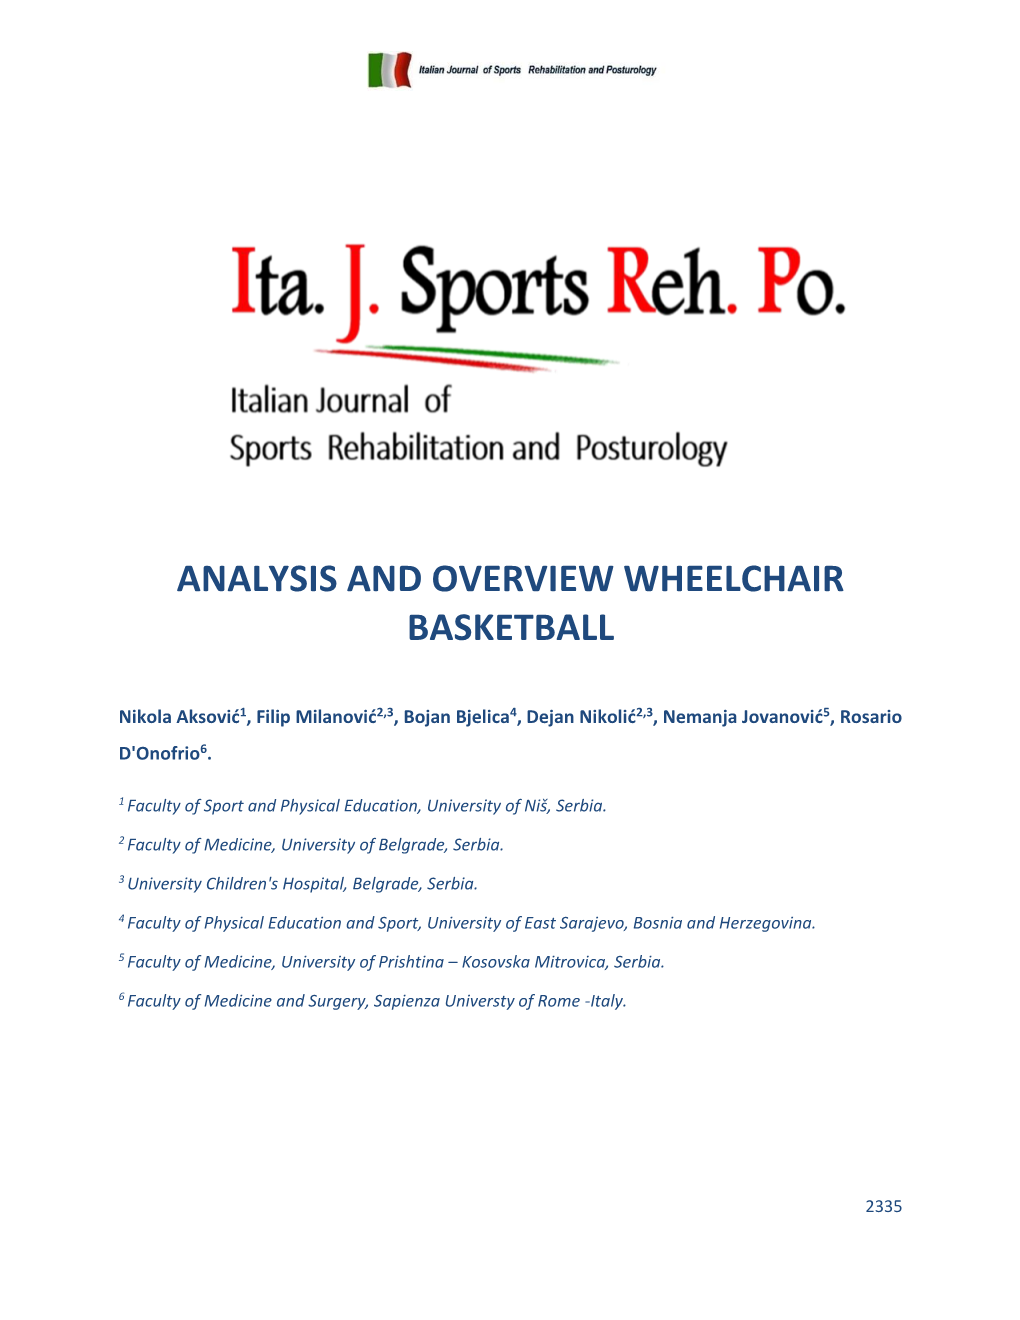 Analysis and Overview Wheelchair Basketball